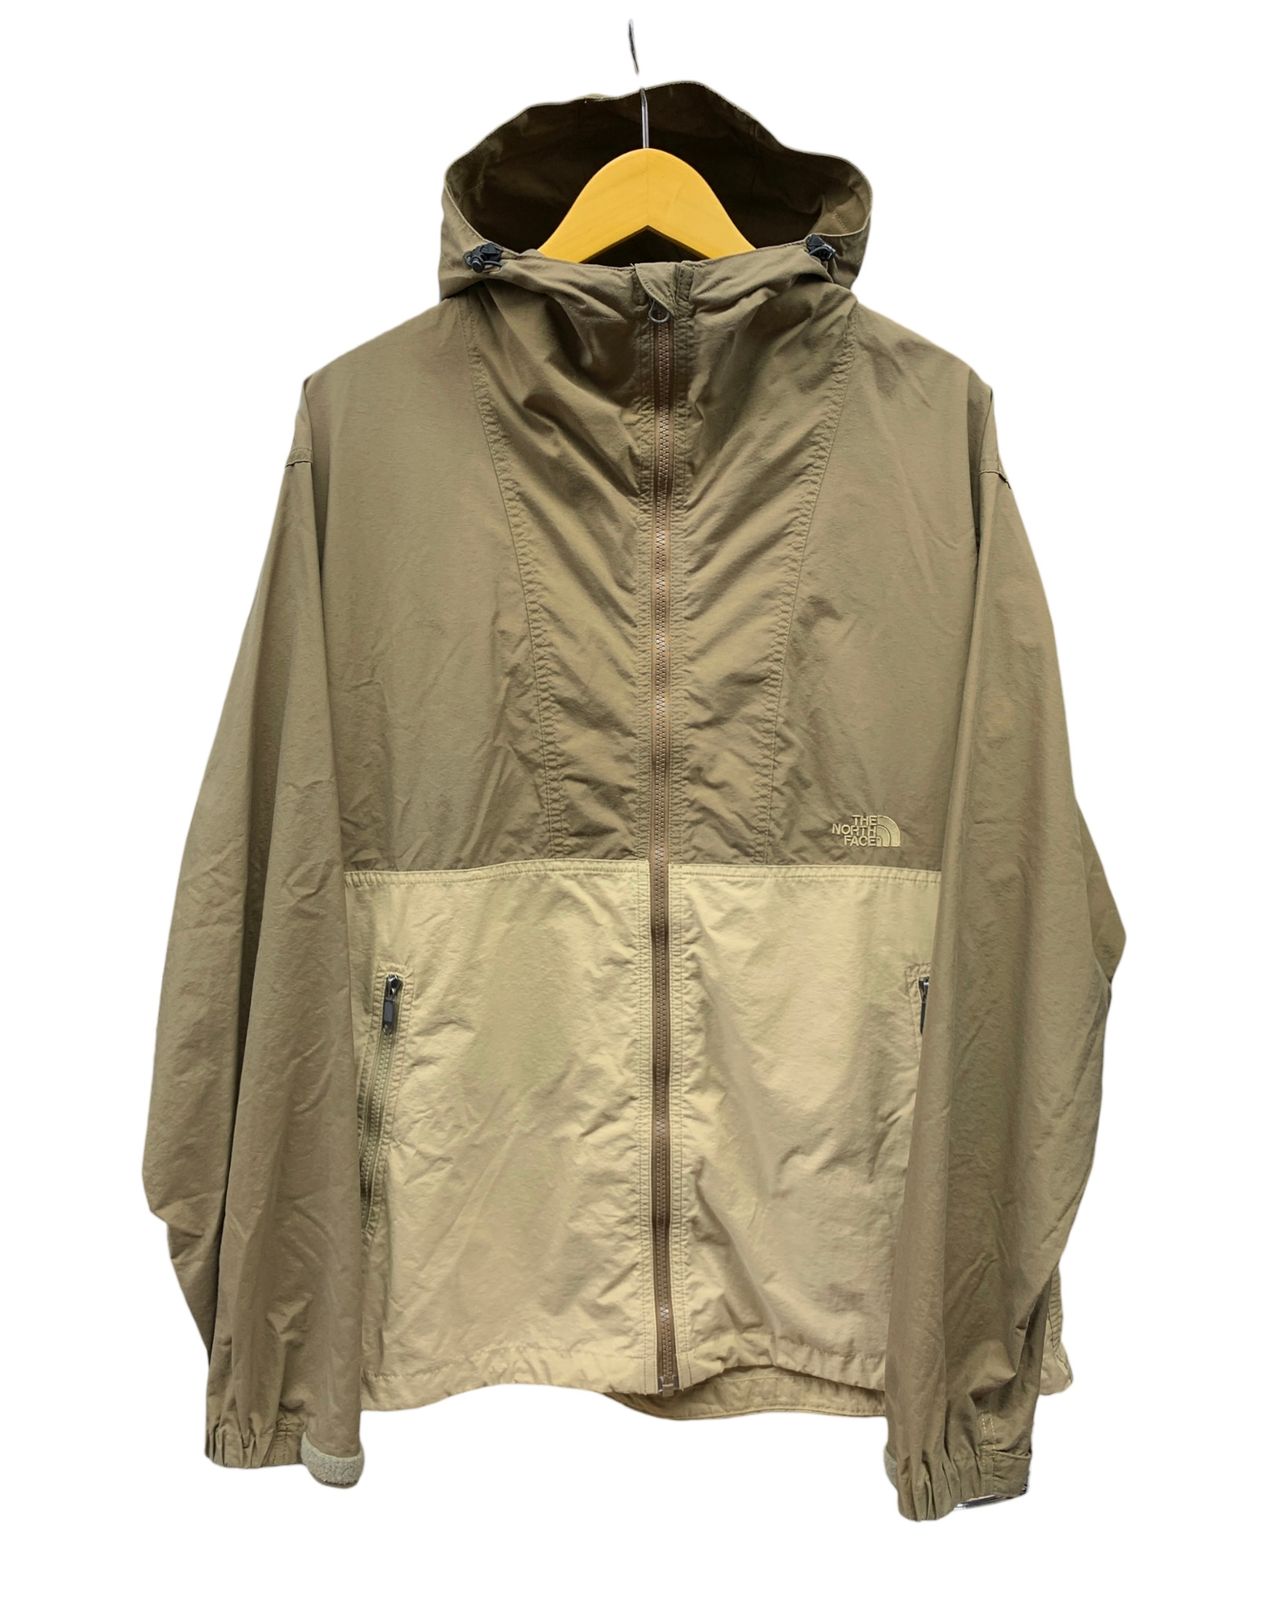 THE NORTH FACE (ザノースフェイス) コンパクトジャケット ナイロン 